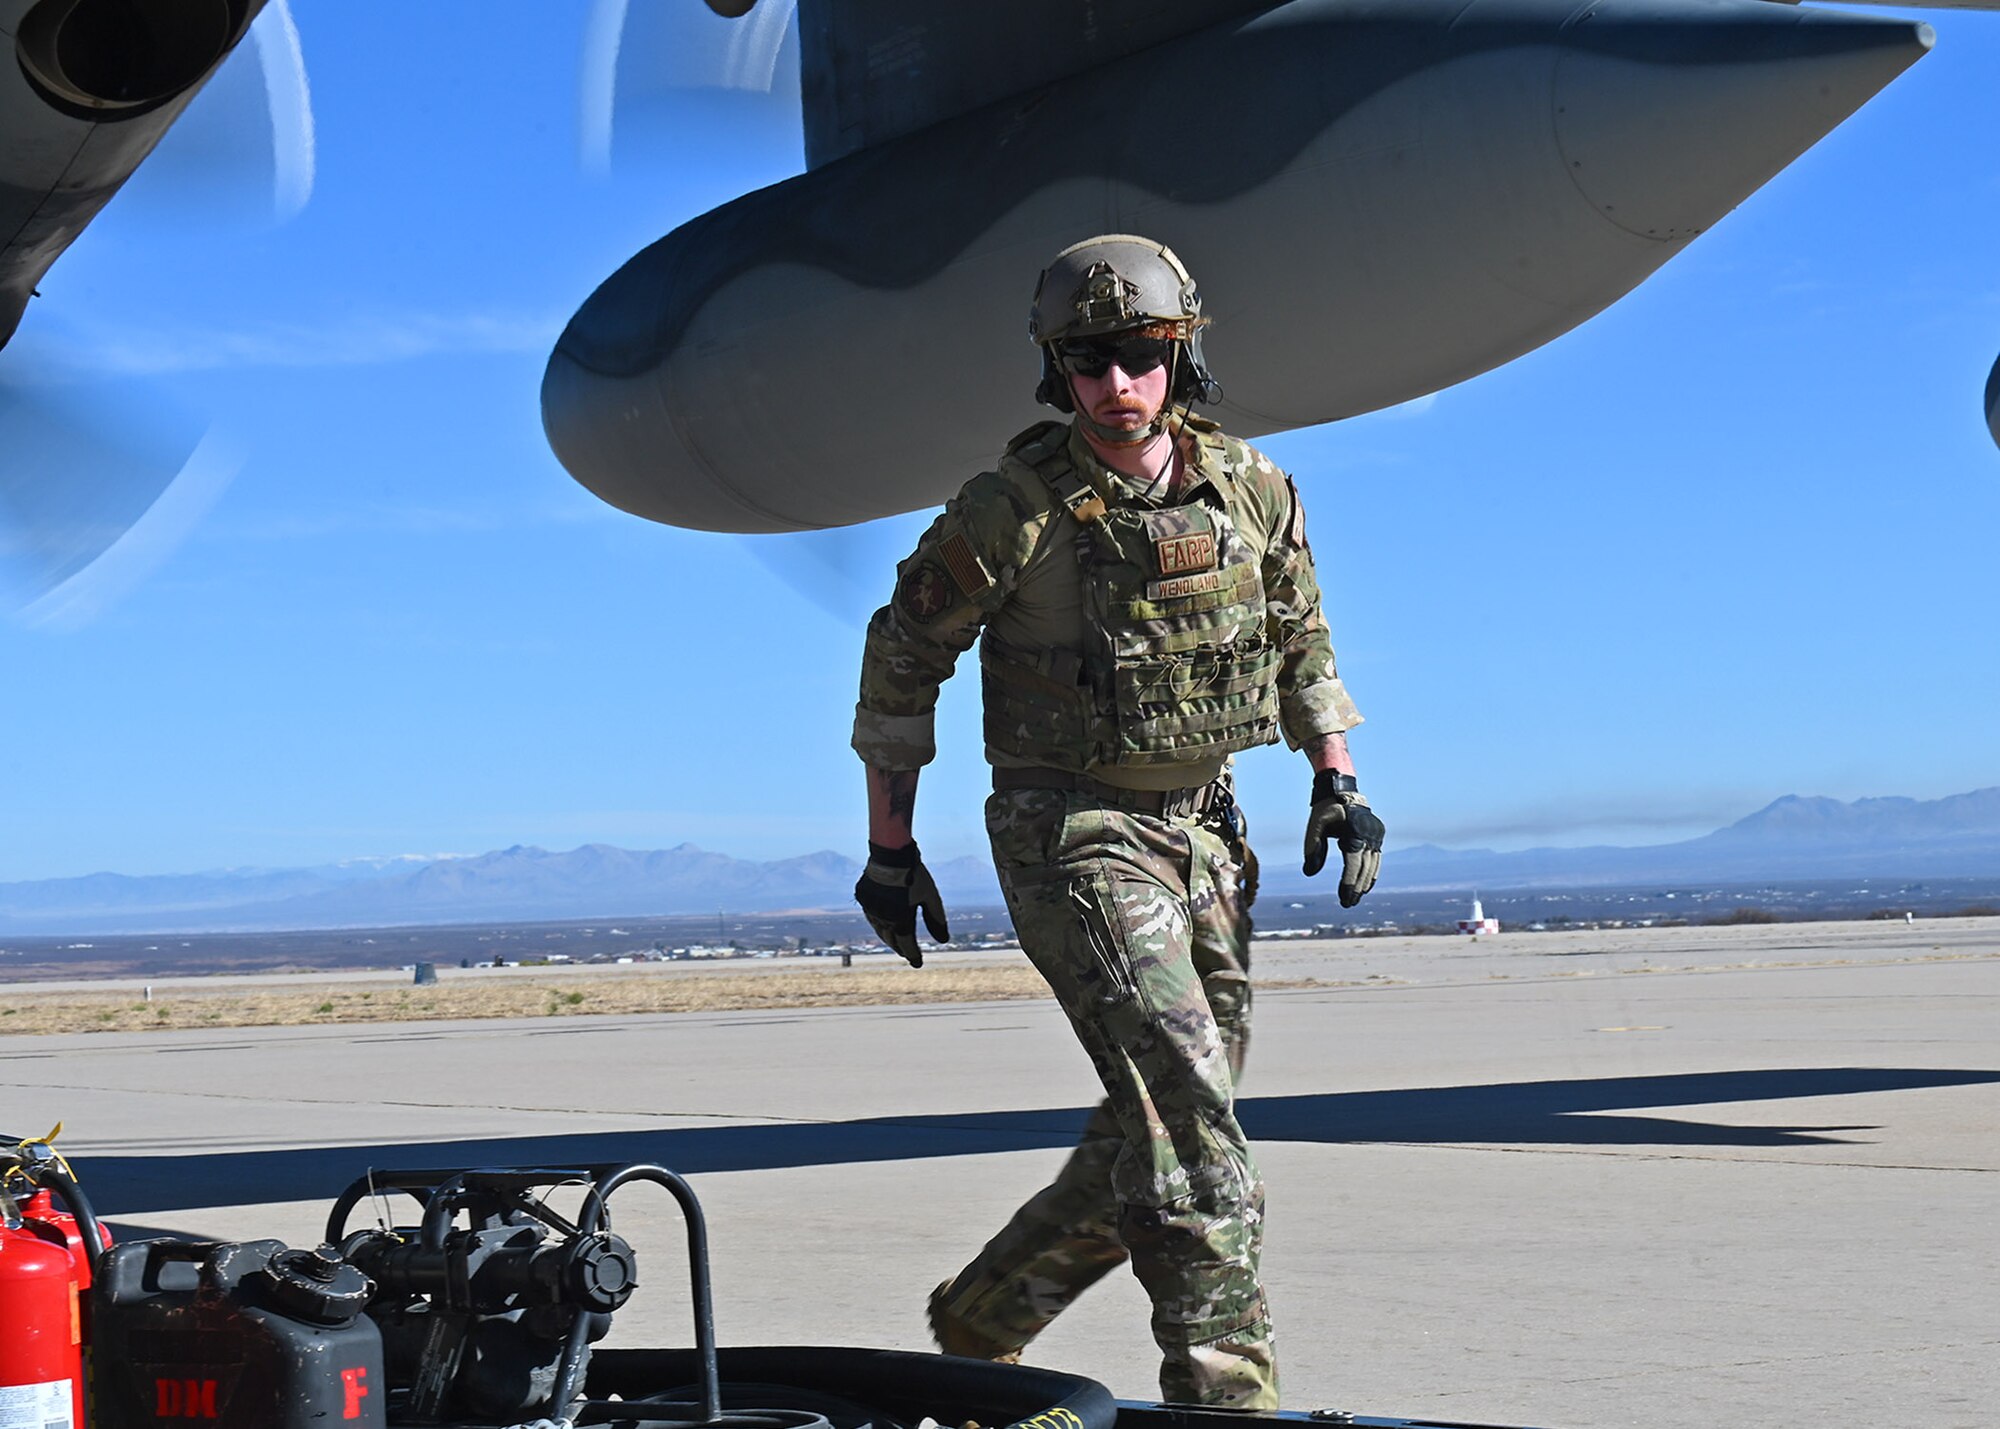 U.S. Air Force Senior Airman Oliver Wendland, 355th Logistics Readiness Squadron forward area refueling point operator,  prepares for FARP during Exercise Agile Angel at Fort Huachuca, Ariz., Feb. 20, 2024. The purpose of FARP operators was to expeditiously transfer fuel from a tanker aircraft into a receiver aircraft, while aircraft engines remain on. (U.S. Air Force photo by Staff Sgt. Abbey Rieves)